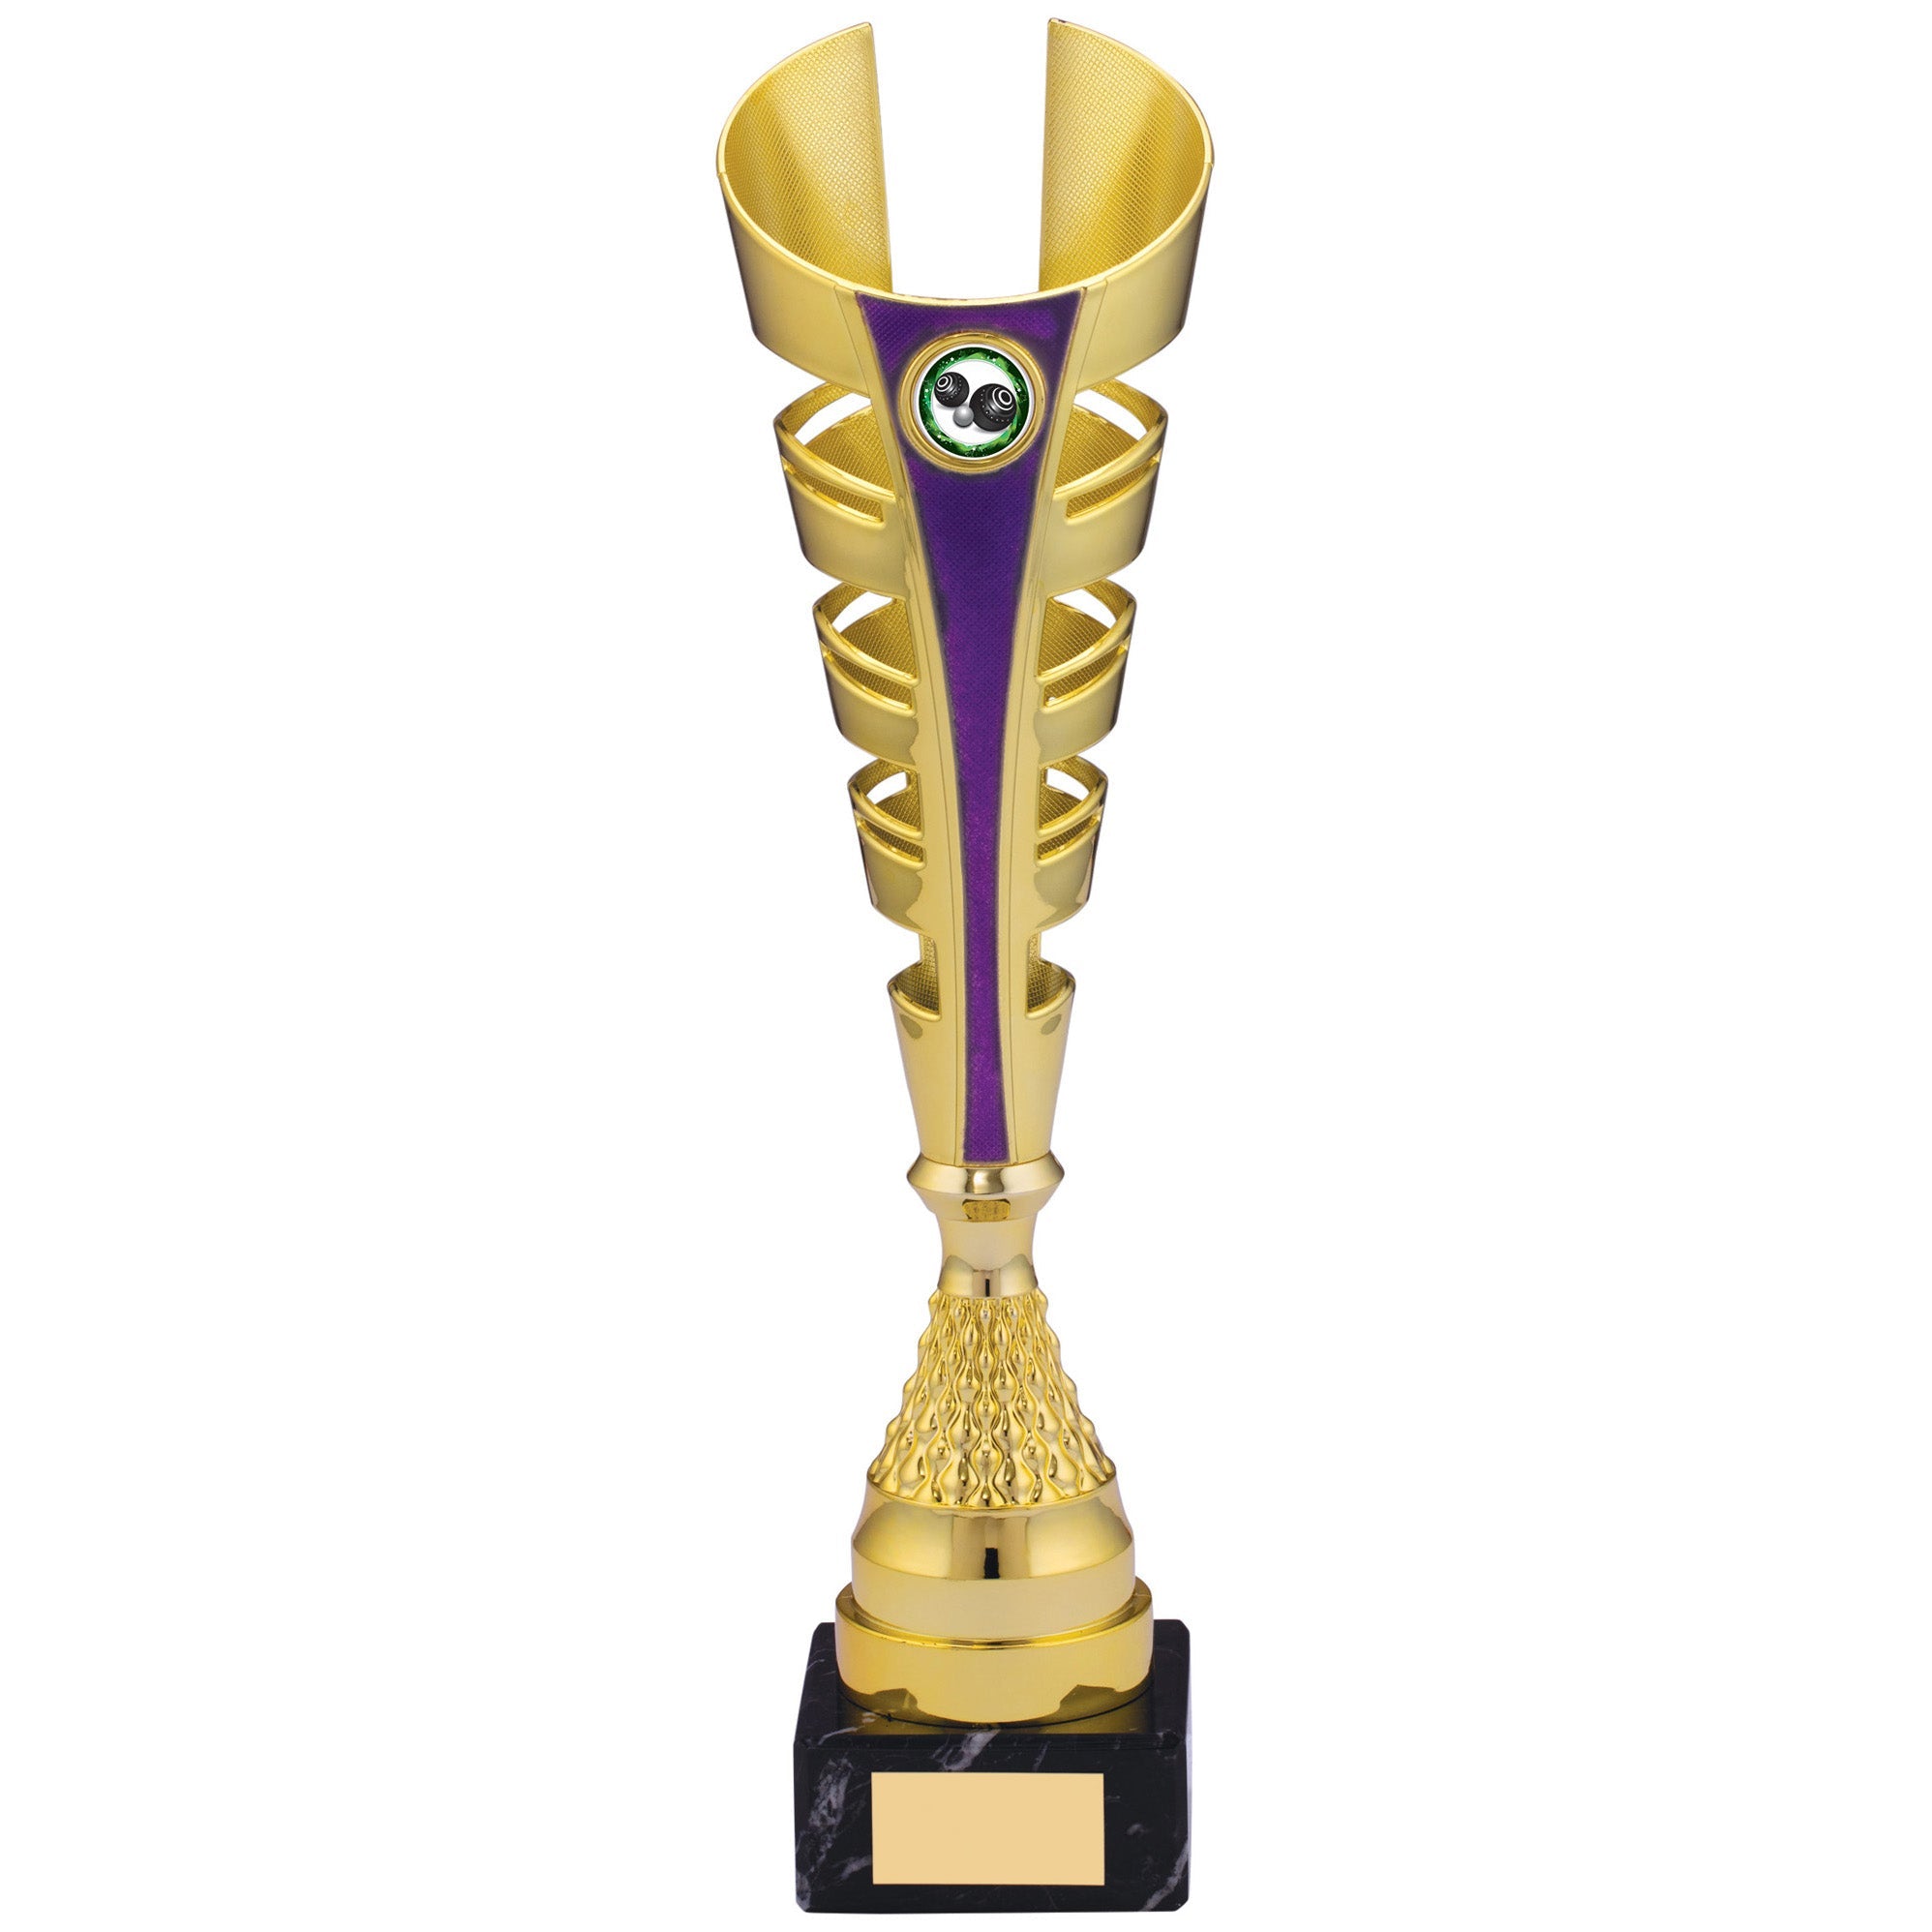 Gold and Purple Futuristic Plastic Trophy Cup on Marble Base